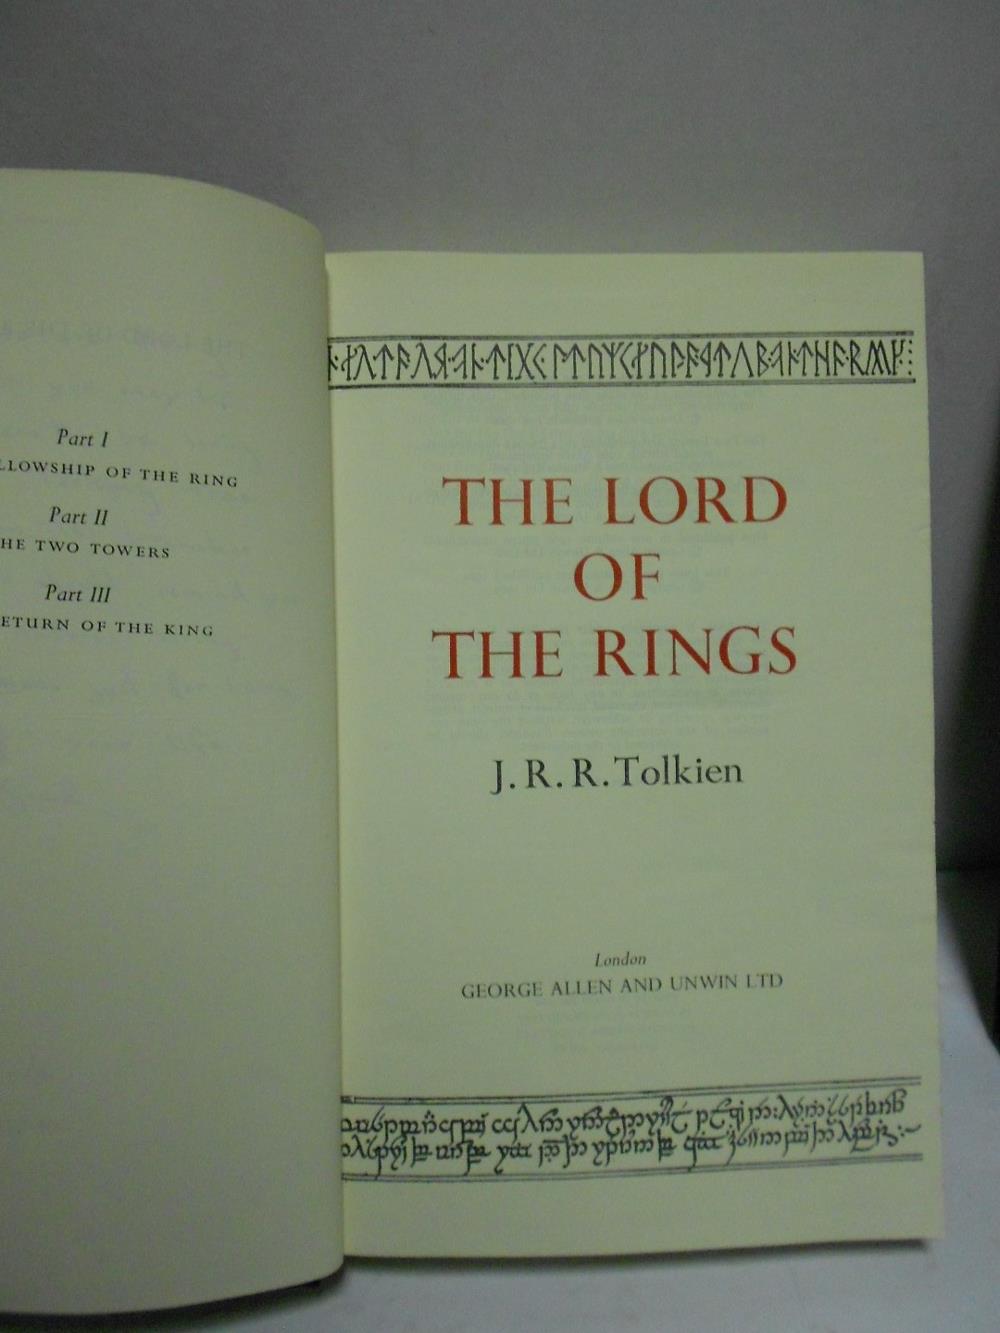 TOLKIEN (J.R.R.) The Lord of the Rings, 1969, 8vo, first single volume India paper edition, - Image 4 of 4